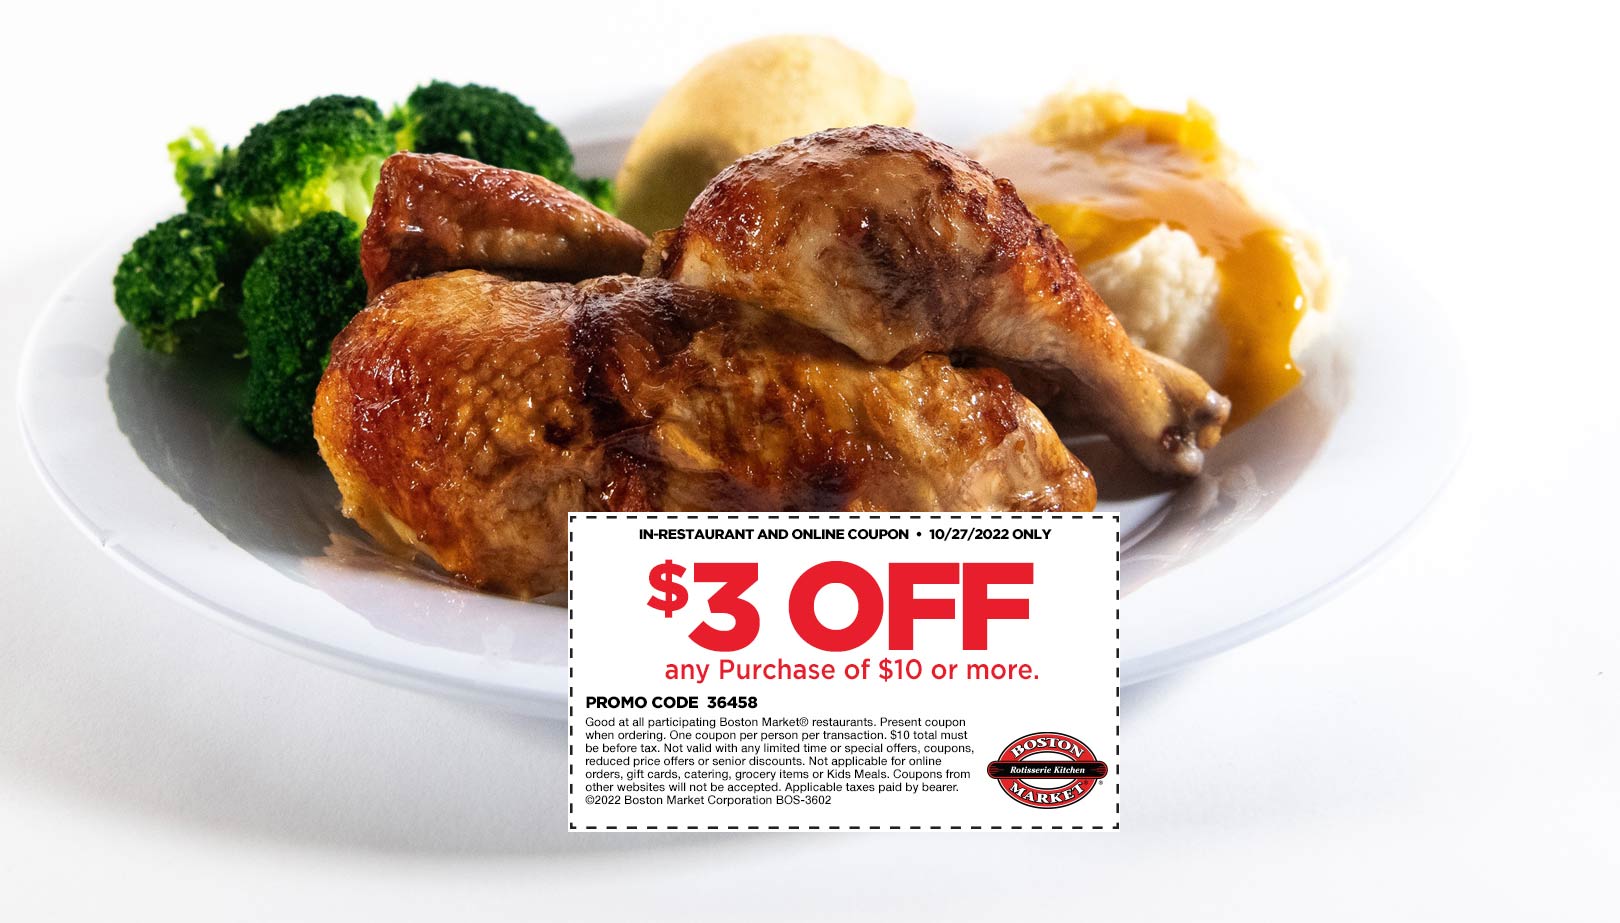 Boston Market restaurants Coupon  $3 off $10 today at Boston Market restaurants #bostonmarket 